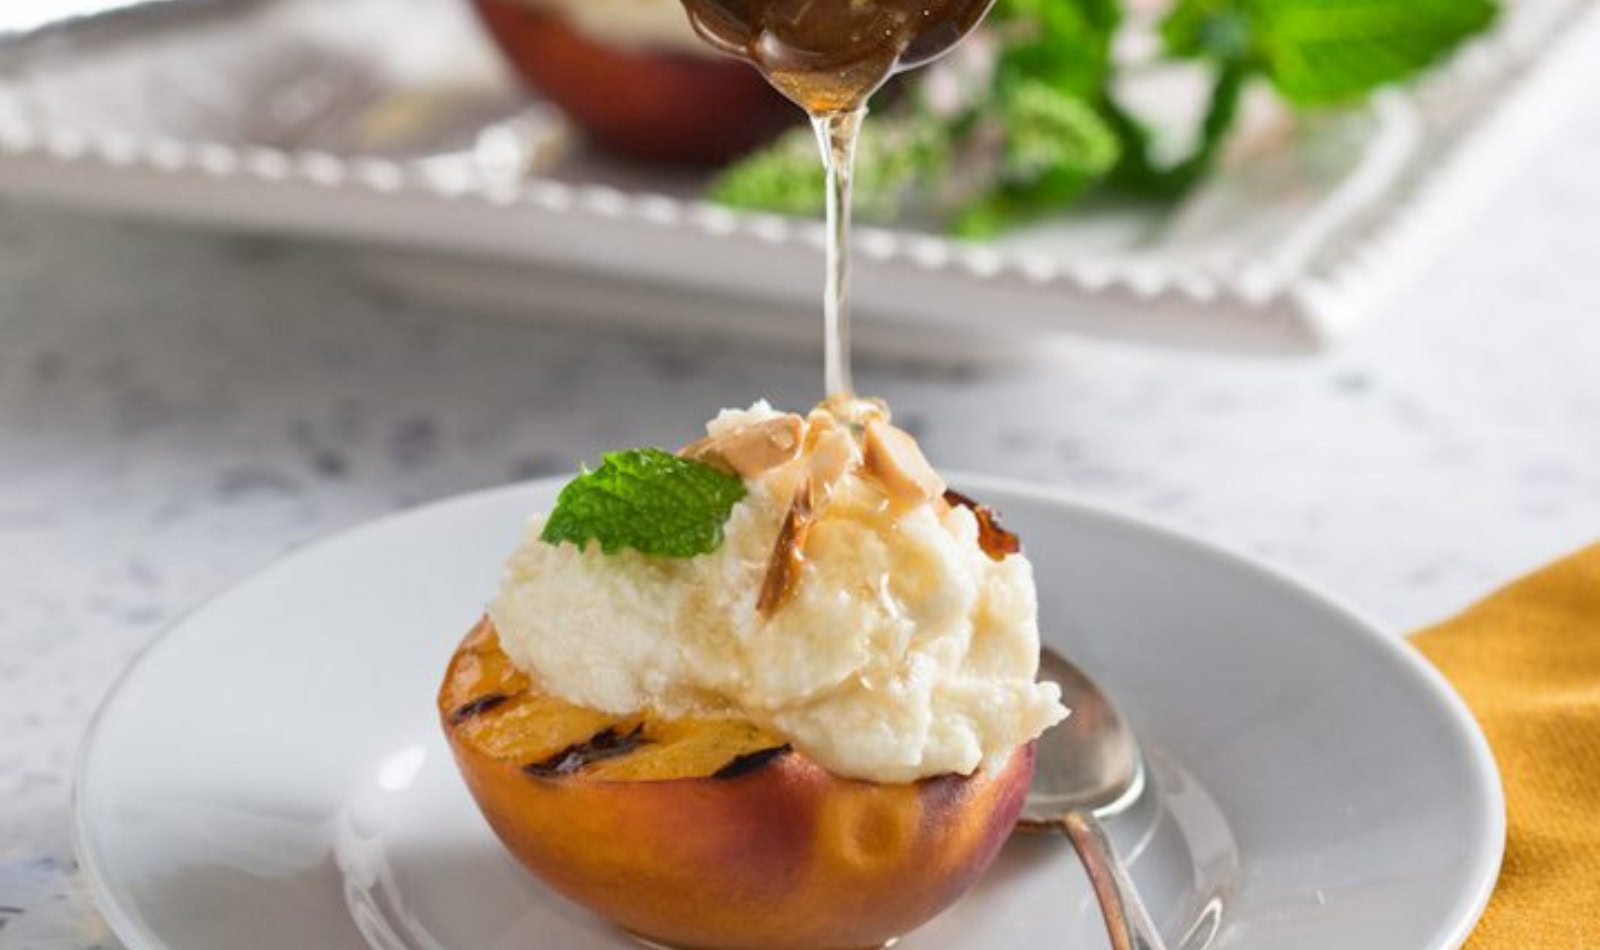 a grilled peach with mascarpone cheese